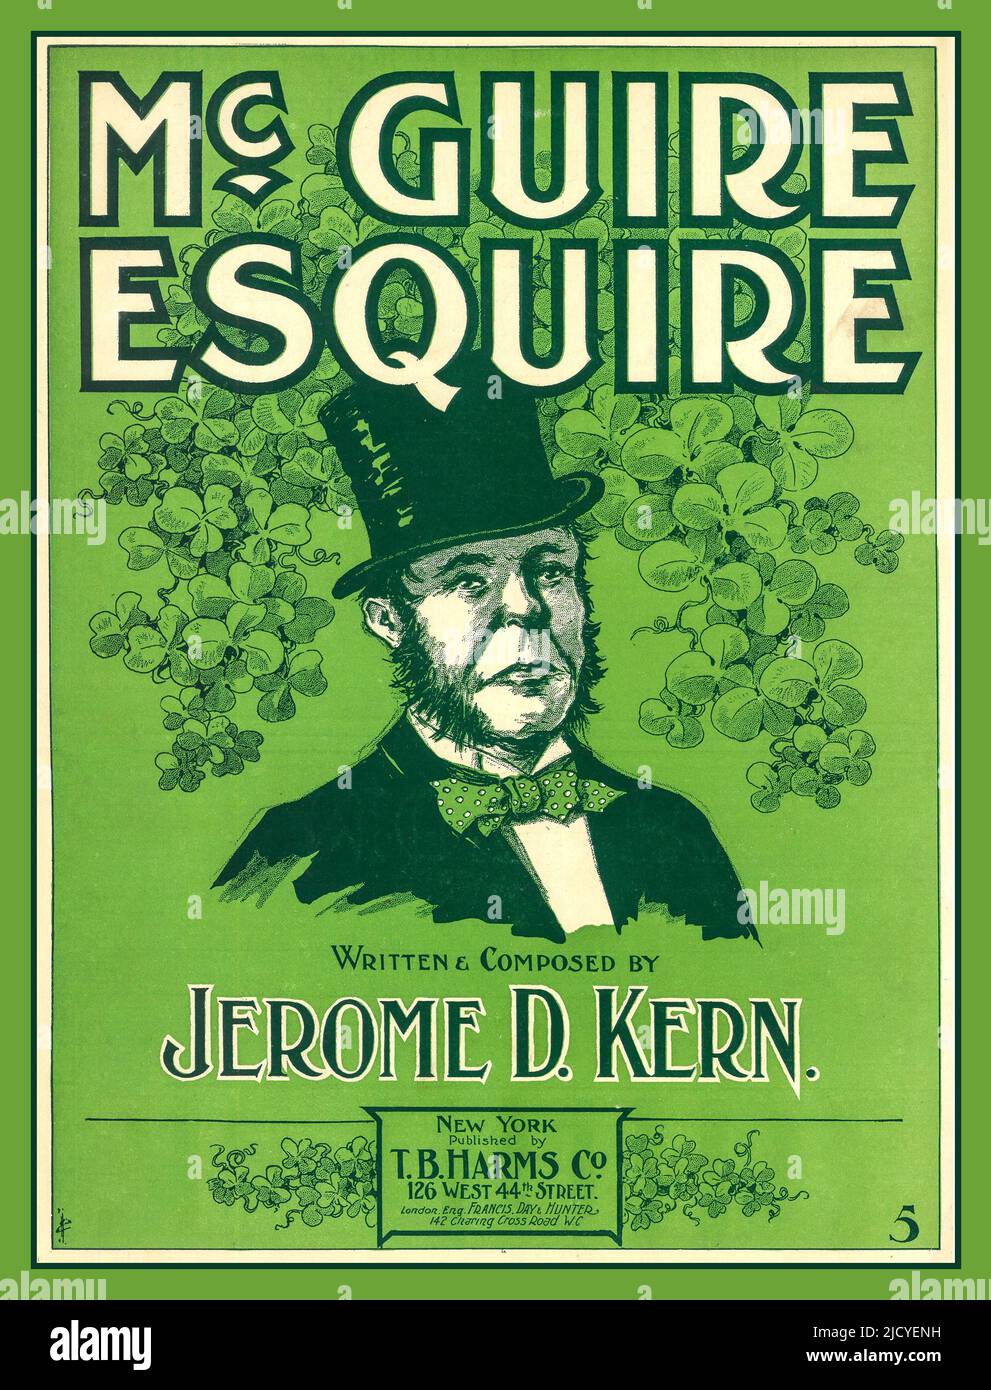 Sheet Music Cover 1900s 'McGuire Esquire' - published in 1904, one of the earliest published songs by Jerome Kern Stock Photo